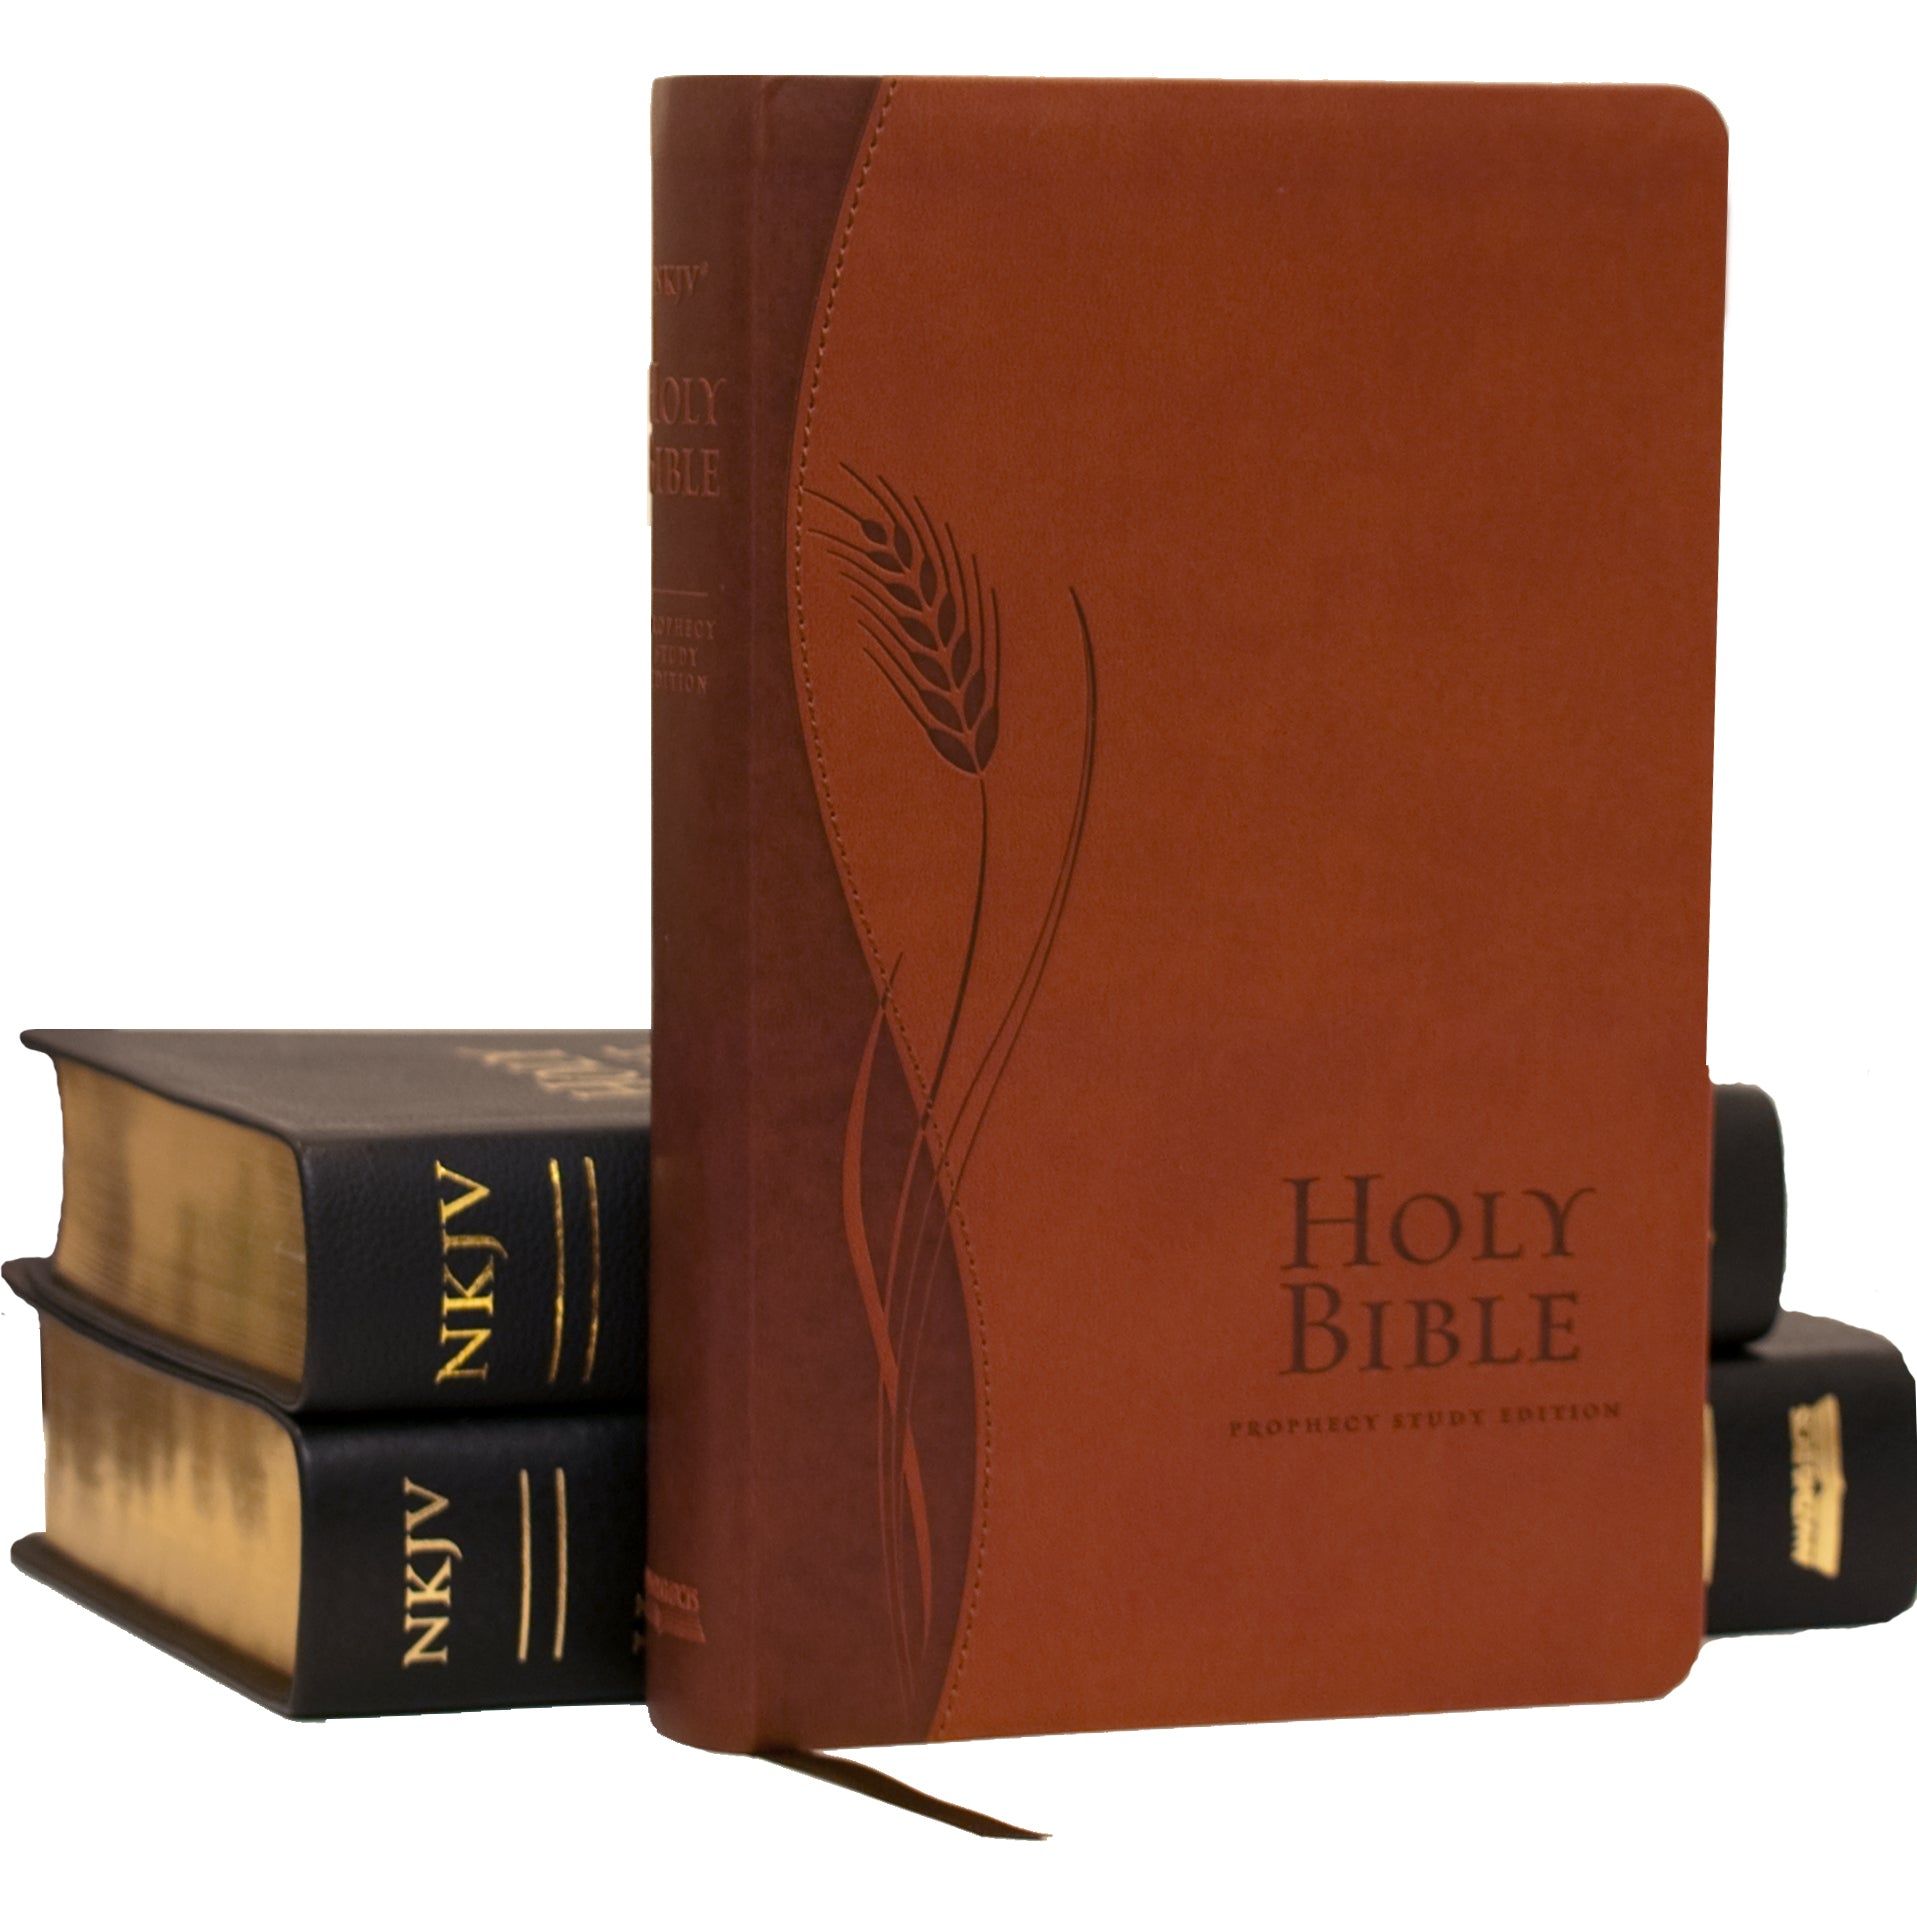 Clearance NKJV Prophecy Study Bible (Brown Leathersoft) by Amazing Facts